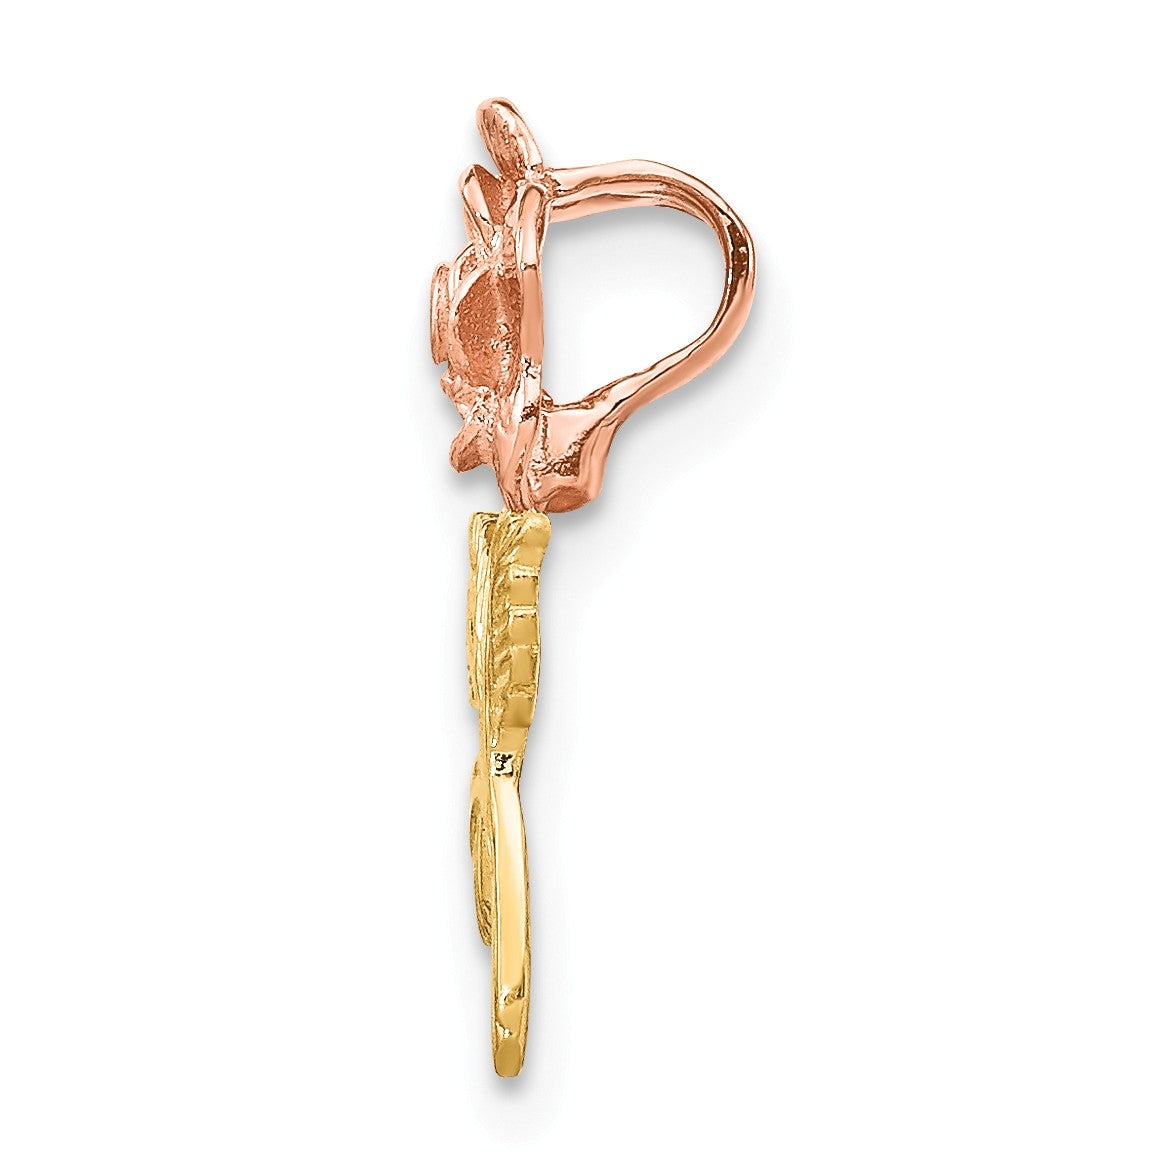 Alternate view of the 14k Yellow and Rose Gold Small Textured Rose Pendant by The Black Bow Jewelry Co.